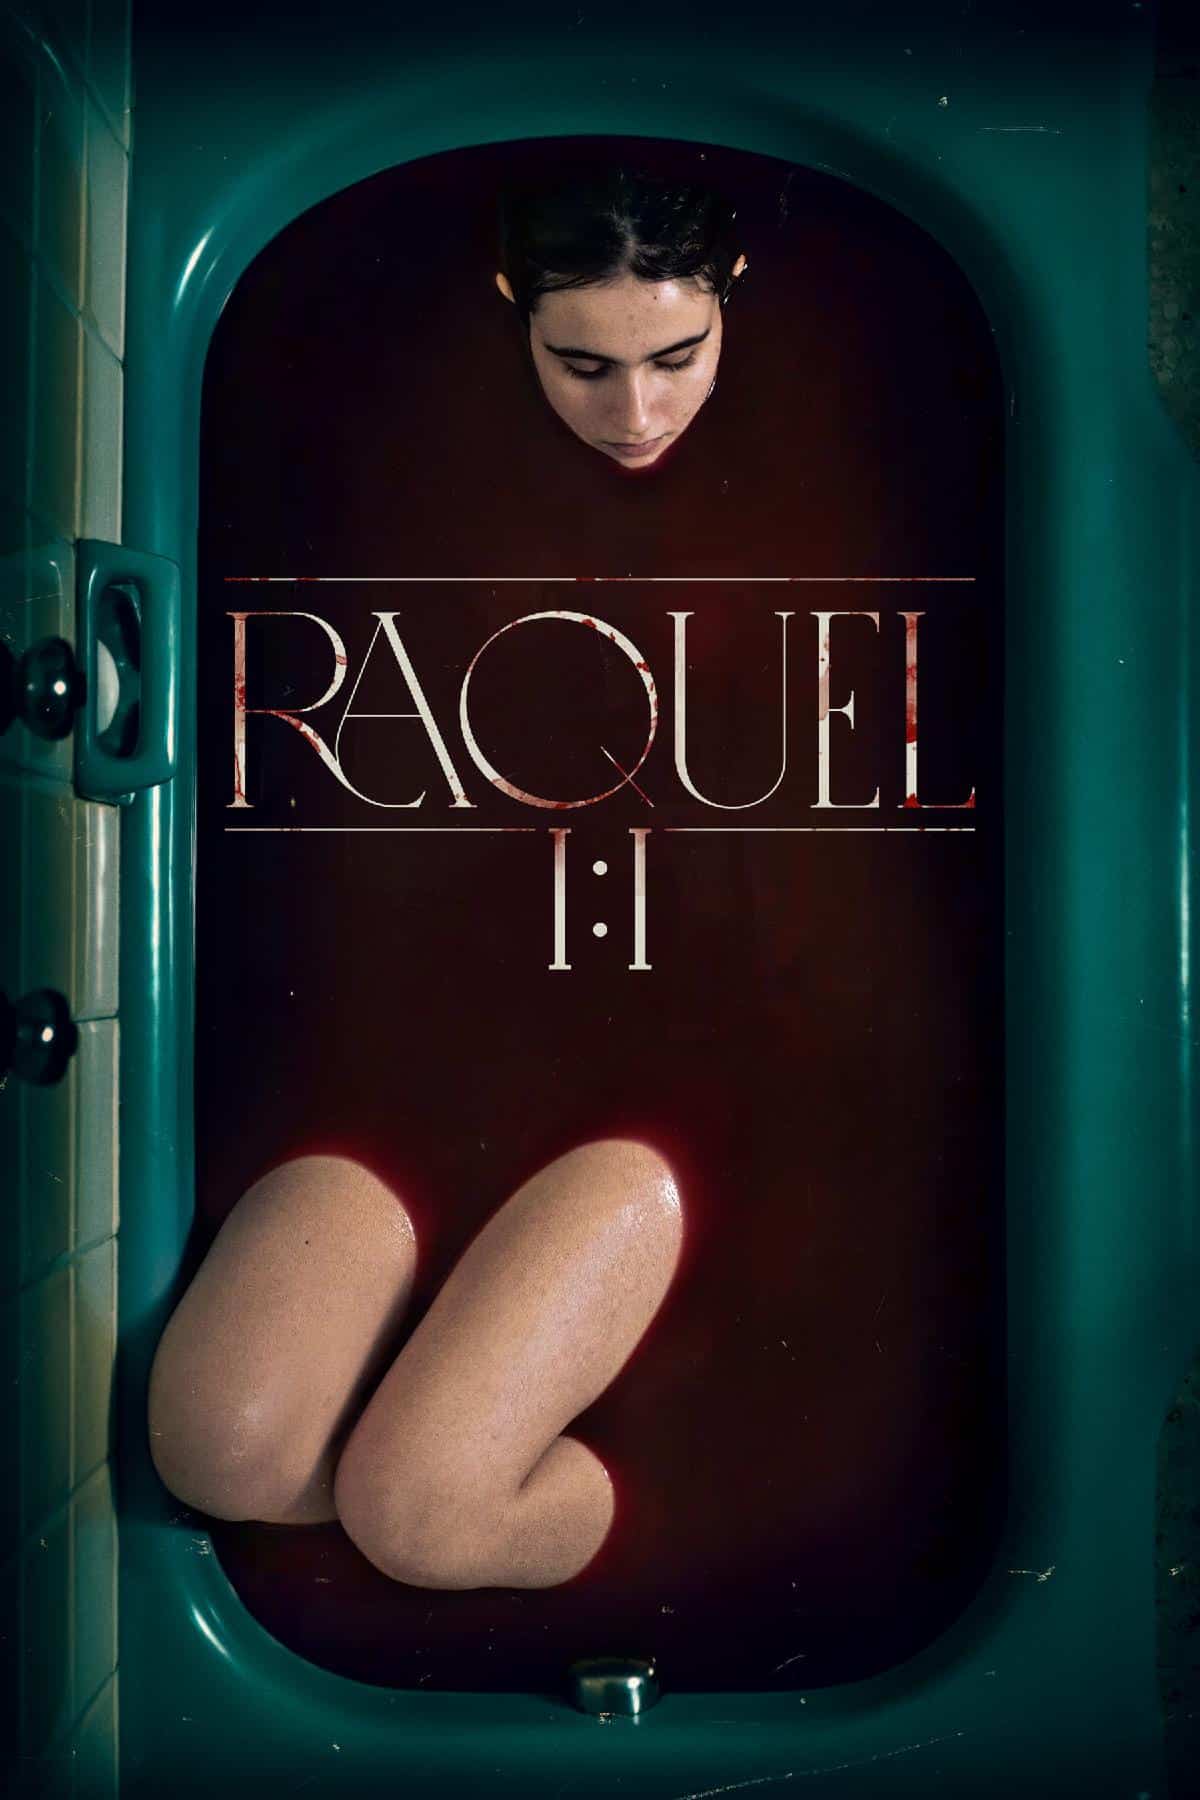 Discover the Compelling Story of Raquel in the SXSW Religious Thriller: RAQUEL 1:1 - Available on VOD and Digital this February! 2